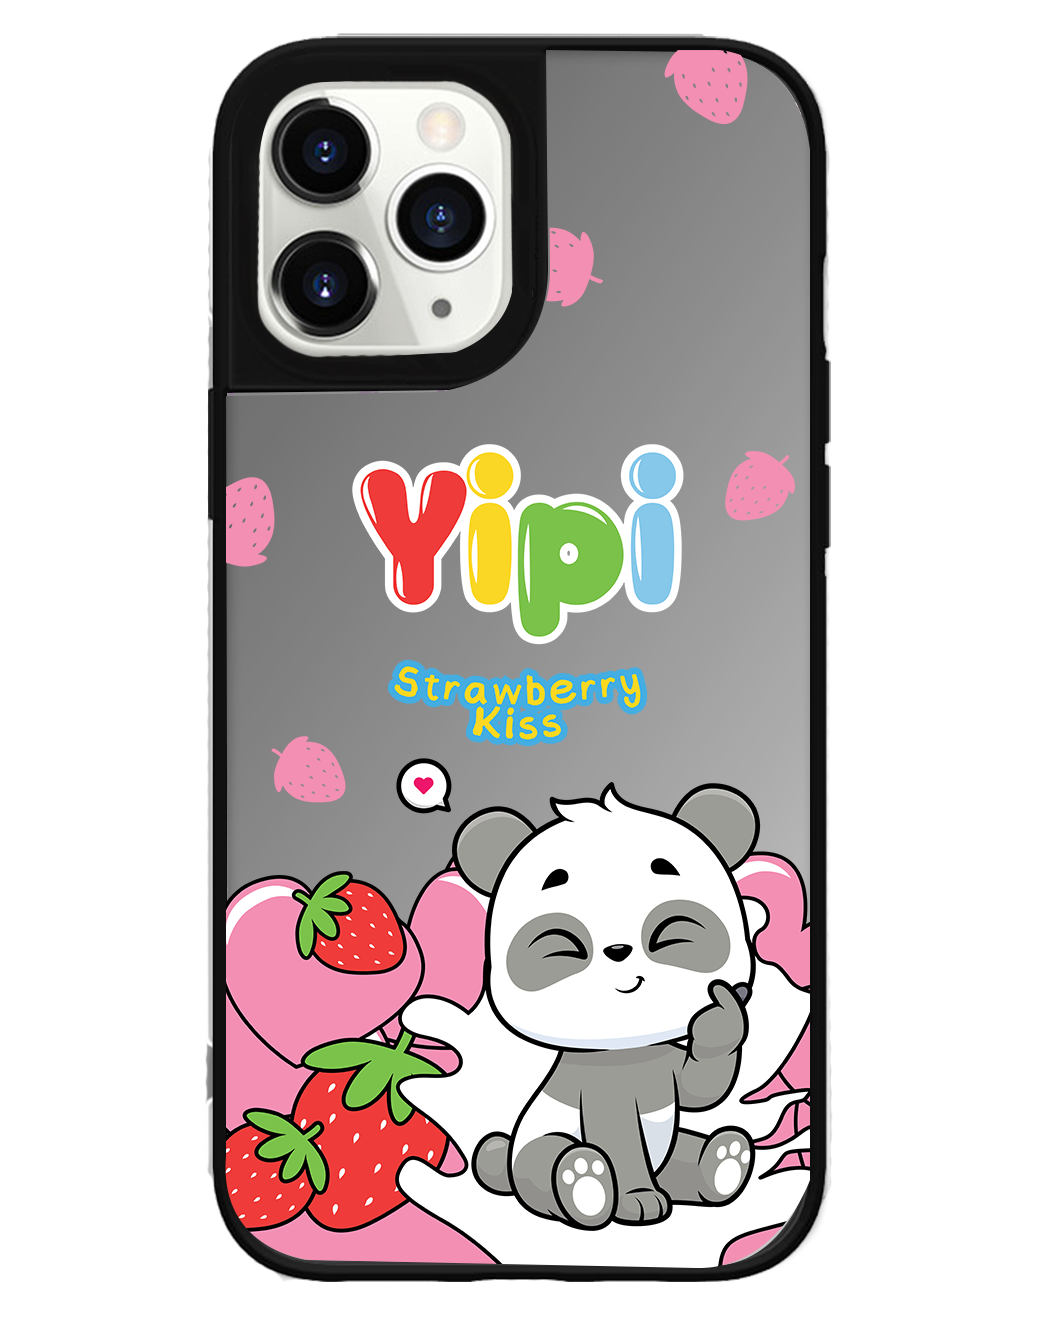 iPhone Mirror Grip Case - Yipi Strawberry Kiss